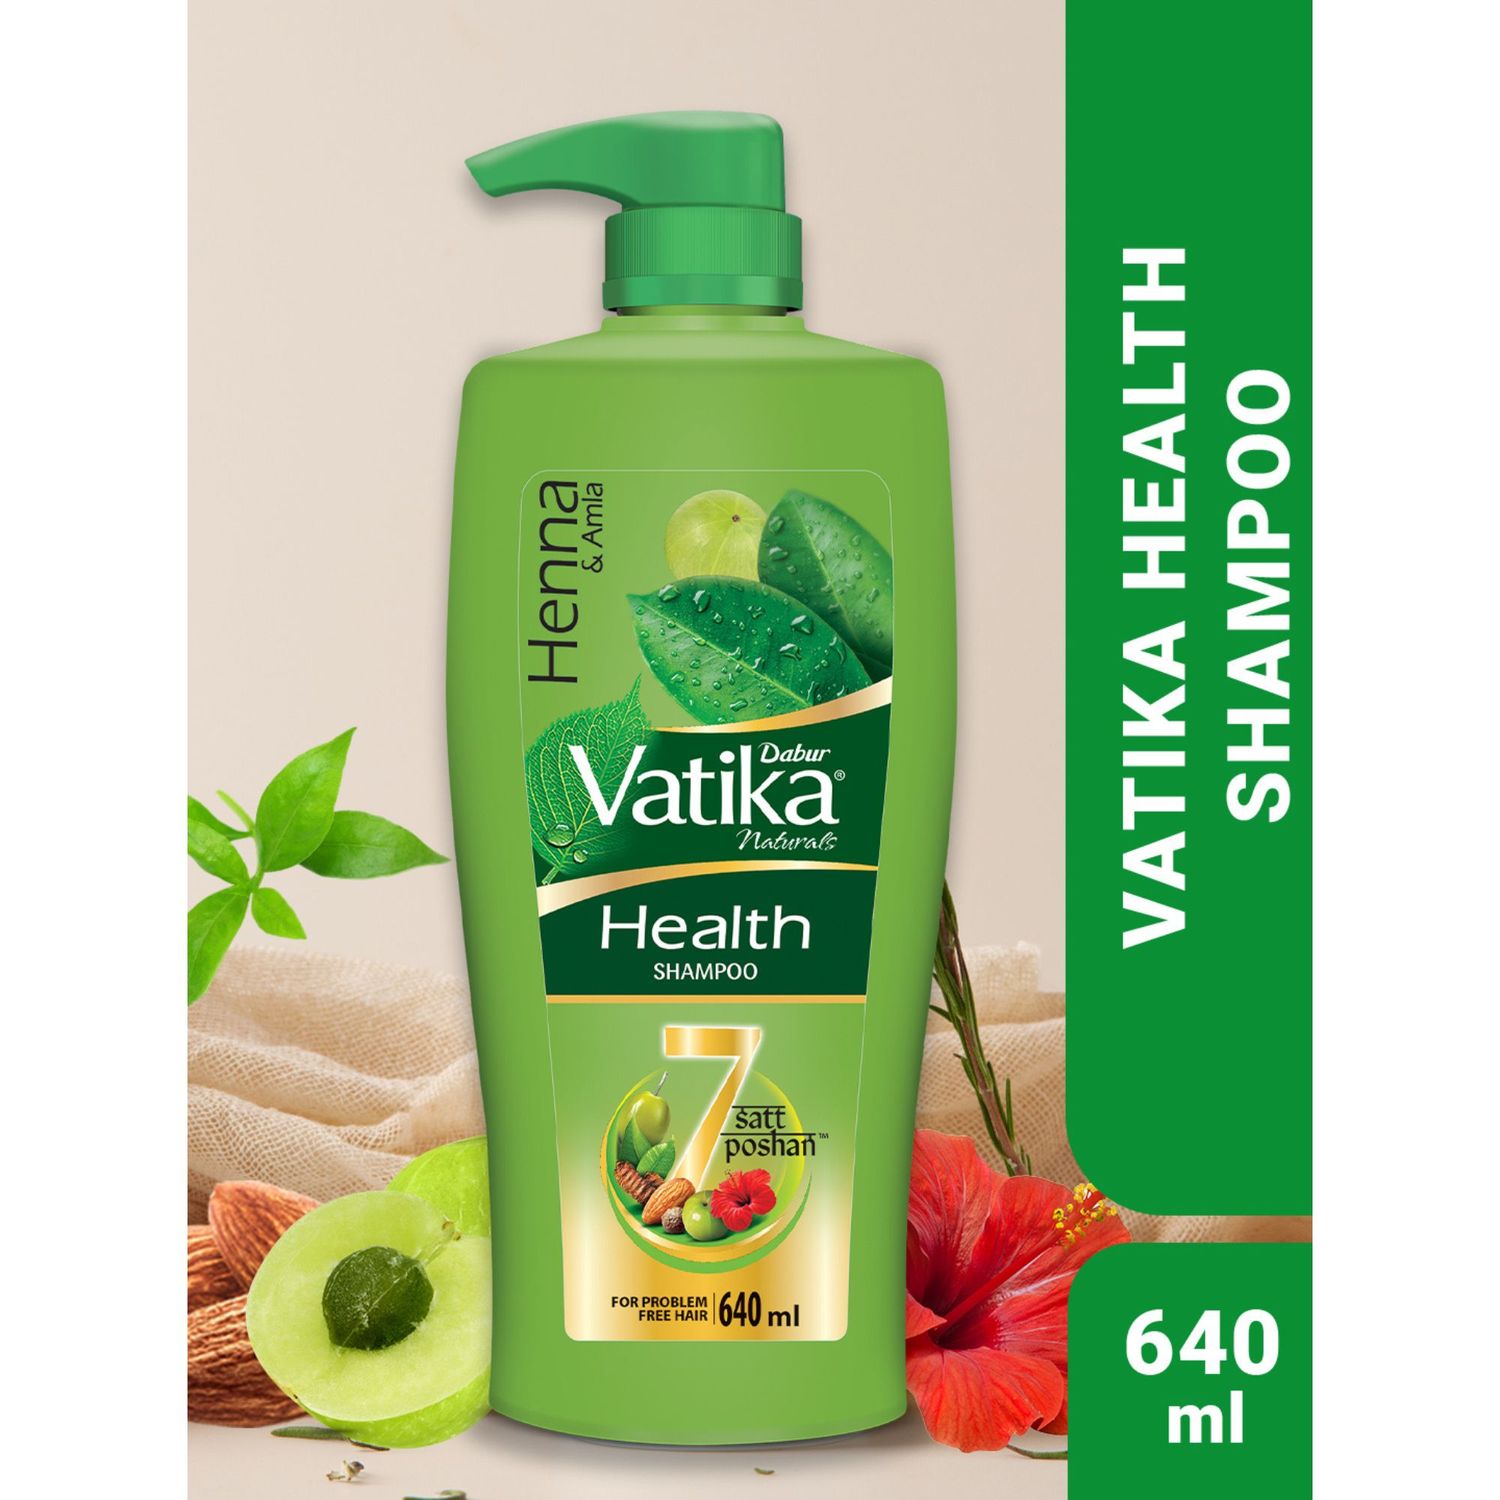 Buy Dabur Vatika Health Shampoo - 640ml | With 7 natural ingredients | For Smooth, Shiny & Nourished Hair | Repairs Hair damage, Controls Frizz | For All Hair Types | Goodness of Henna & Amla - Purplle